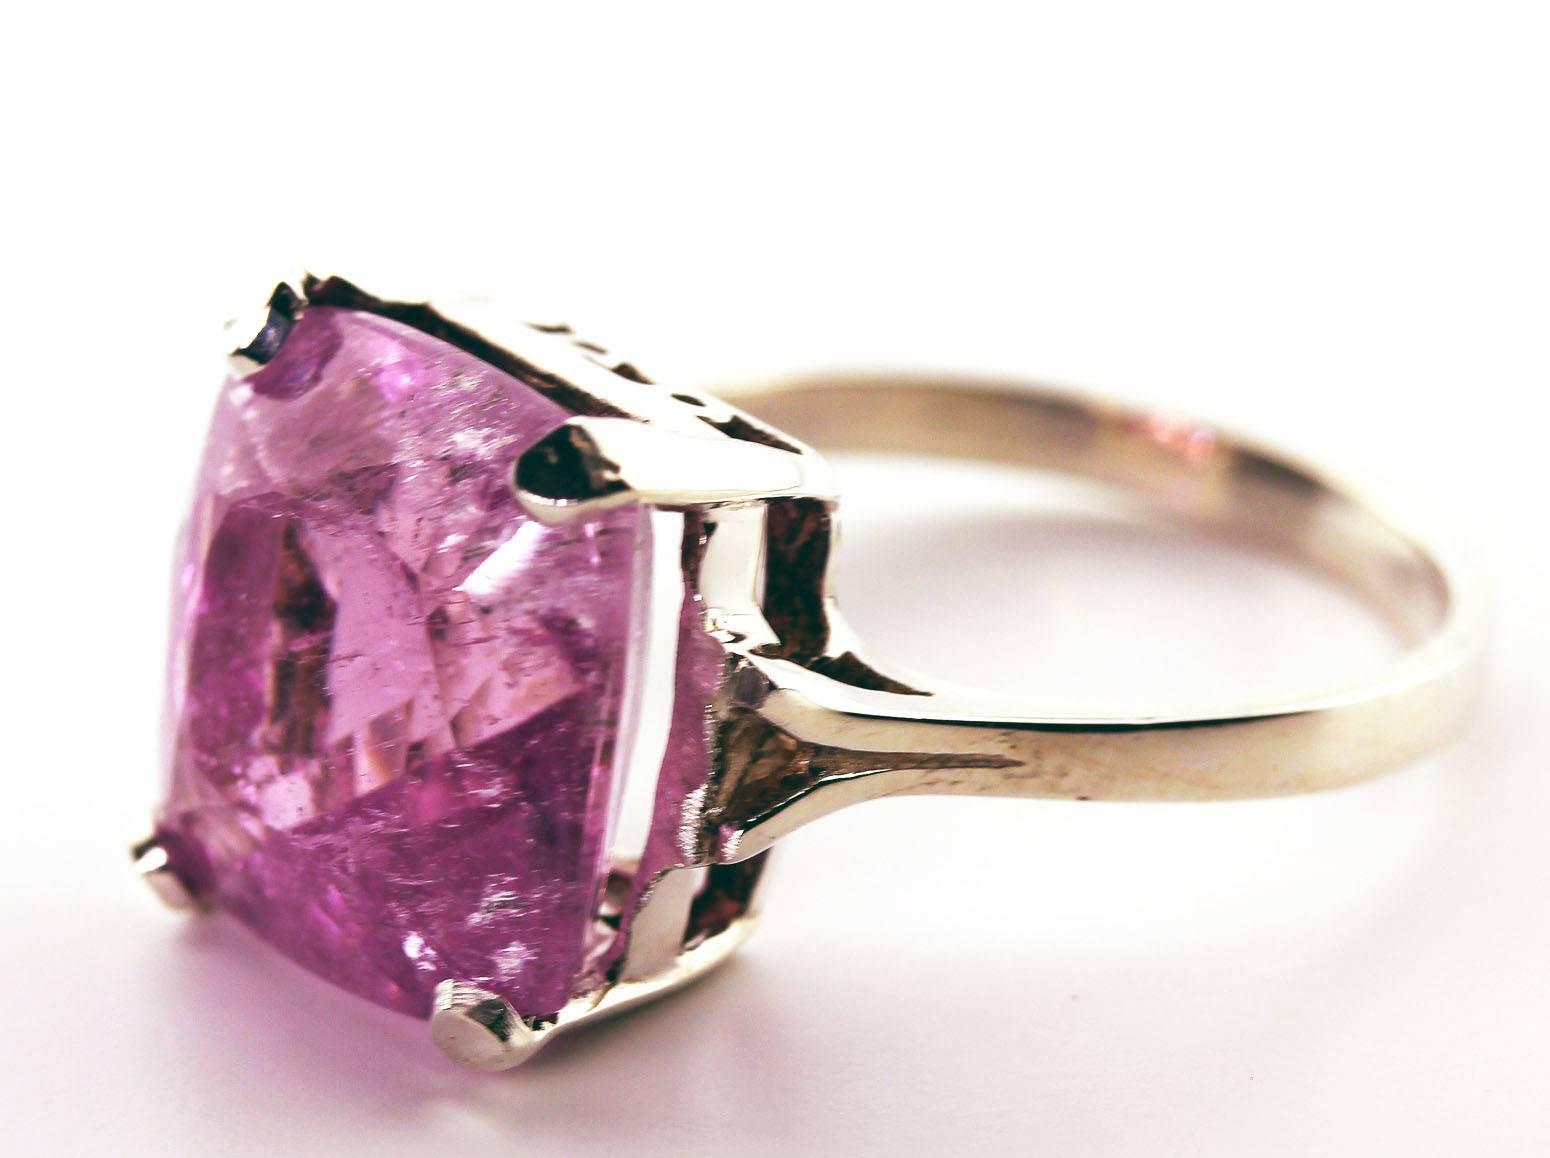 This 13.1 Carat unique pink pink pink cushion cut brilliant visually flawless looking Kunzite is 14 mm x 14 mm and is set in handmade Sterling Silver ring to enhance the sparkle of the gemstone.  The ring size is 9.5 sizable.  